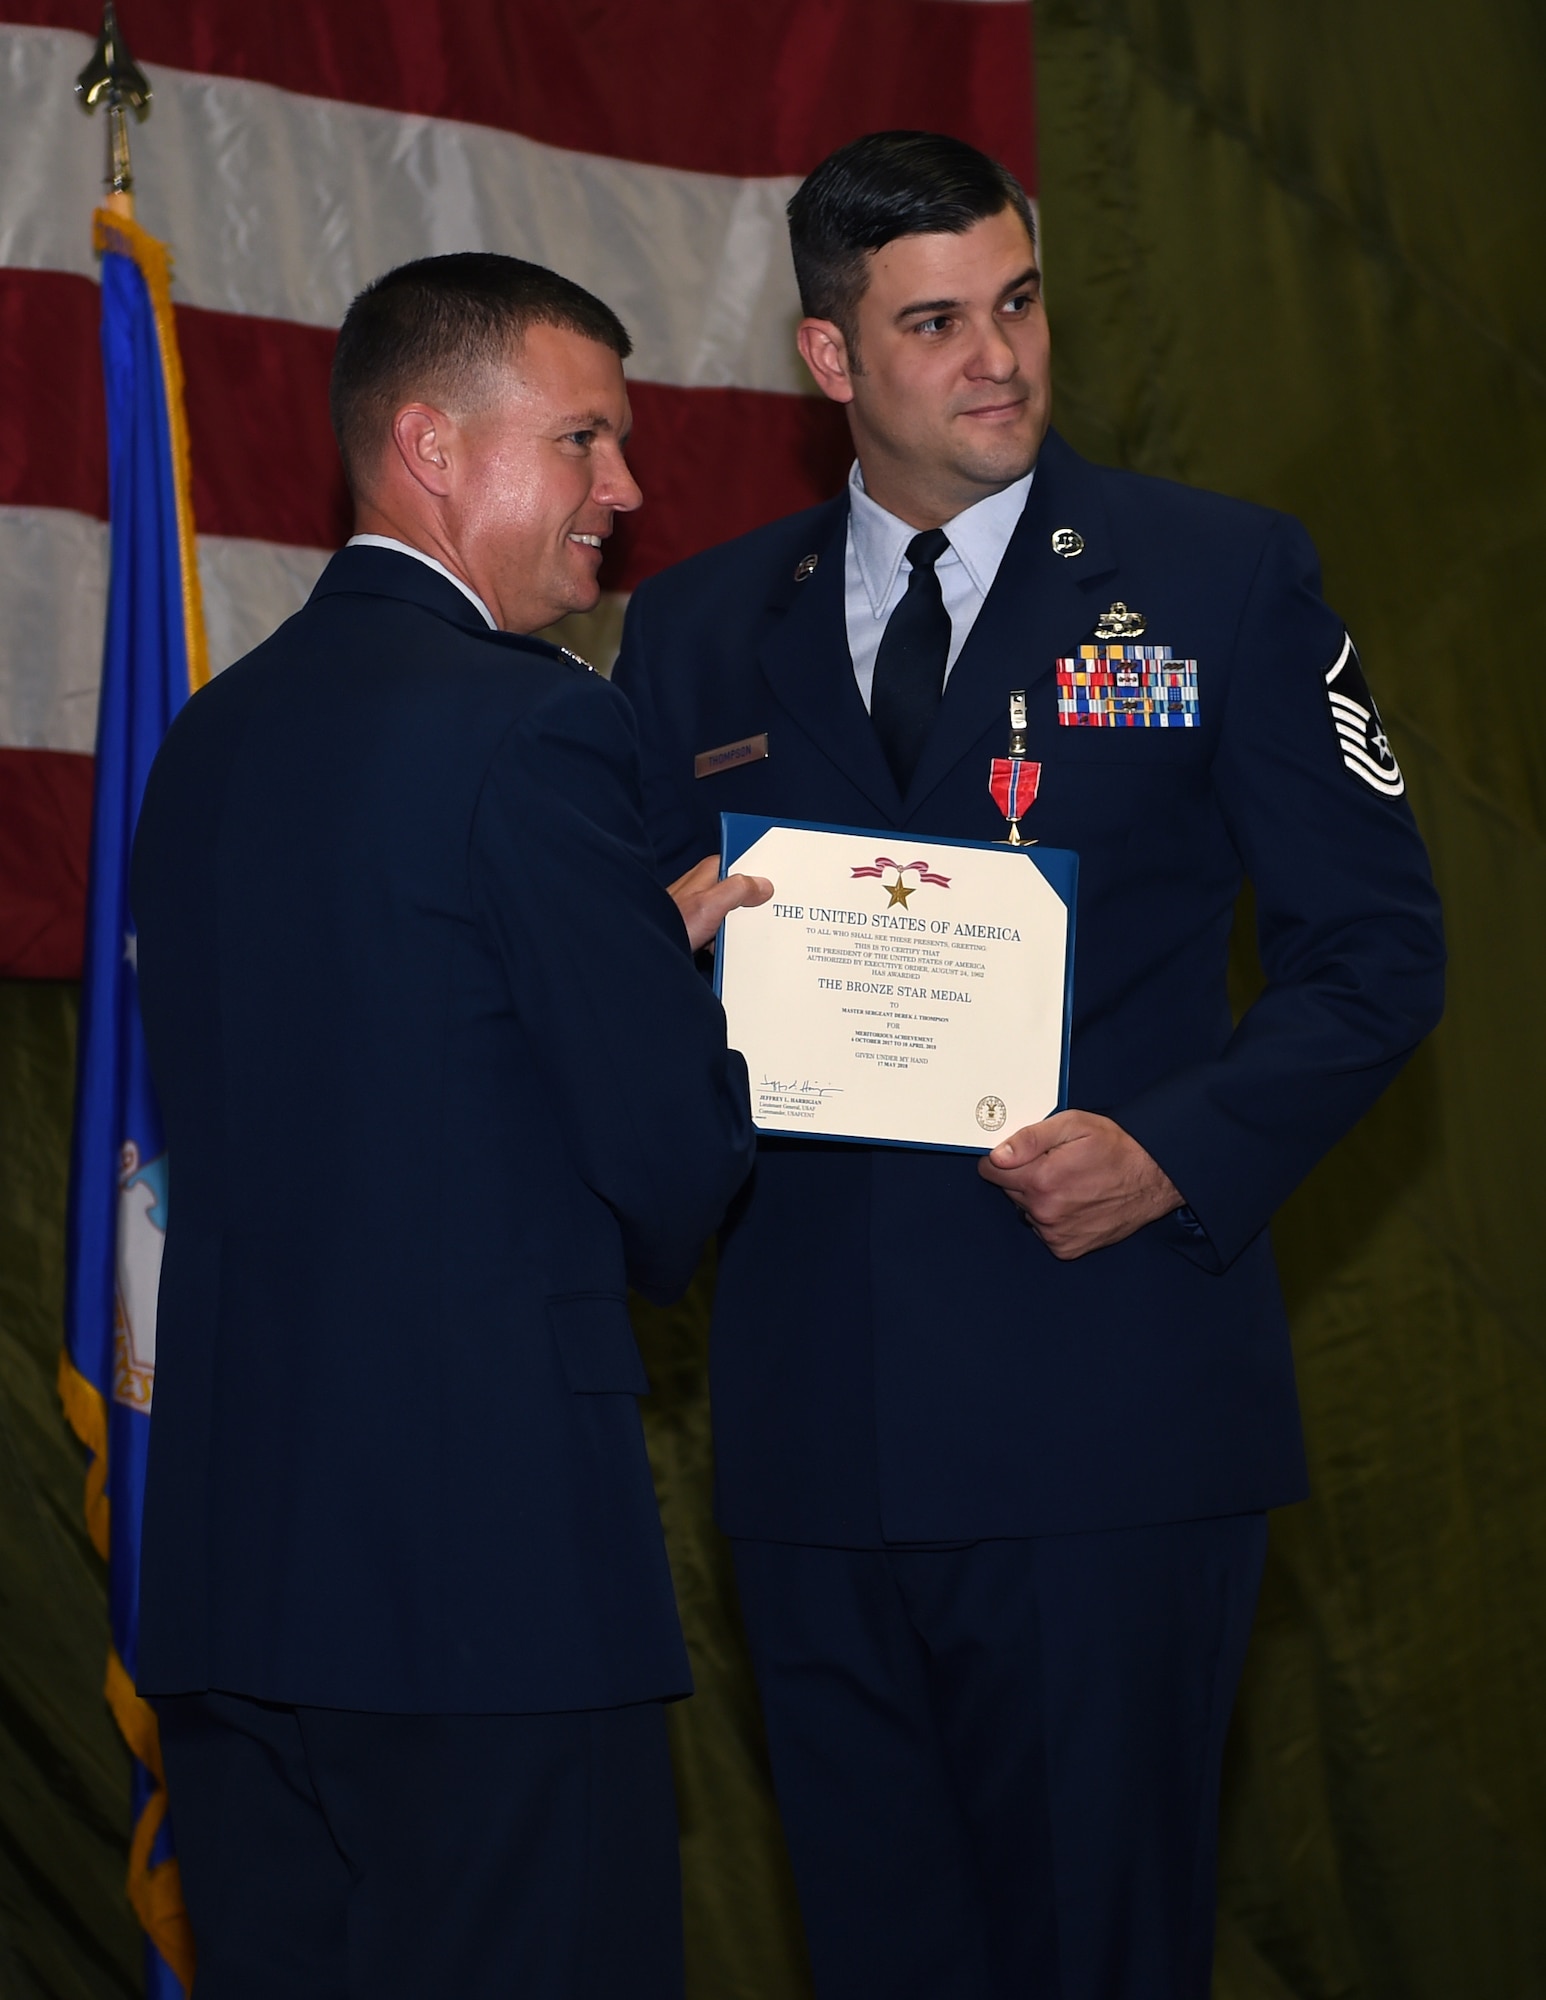 Col. Scovill W. Currin, 62nd Airlift Wing Commander, presents the Bronze Star award to Master Sgt. Derek J. Thompson, inside the 62nd Aerial Port Squadron August 28, 2018.